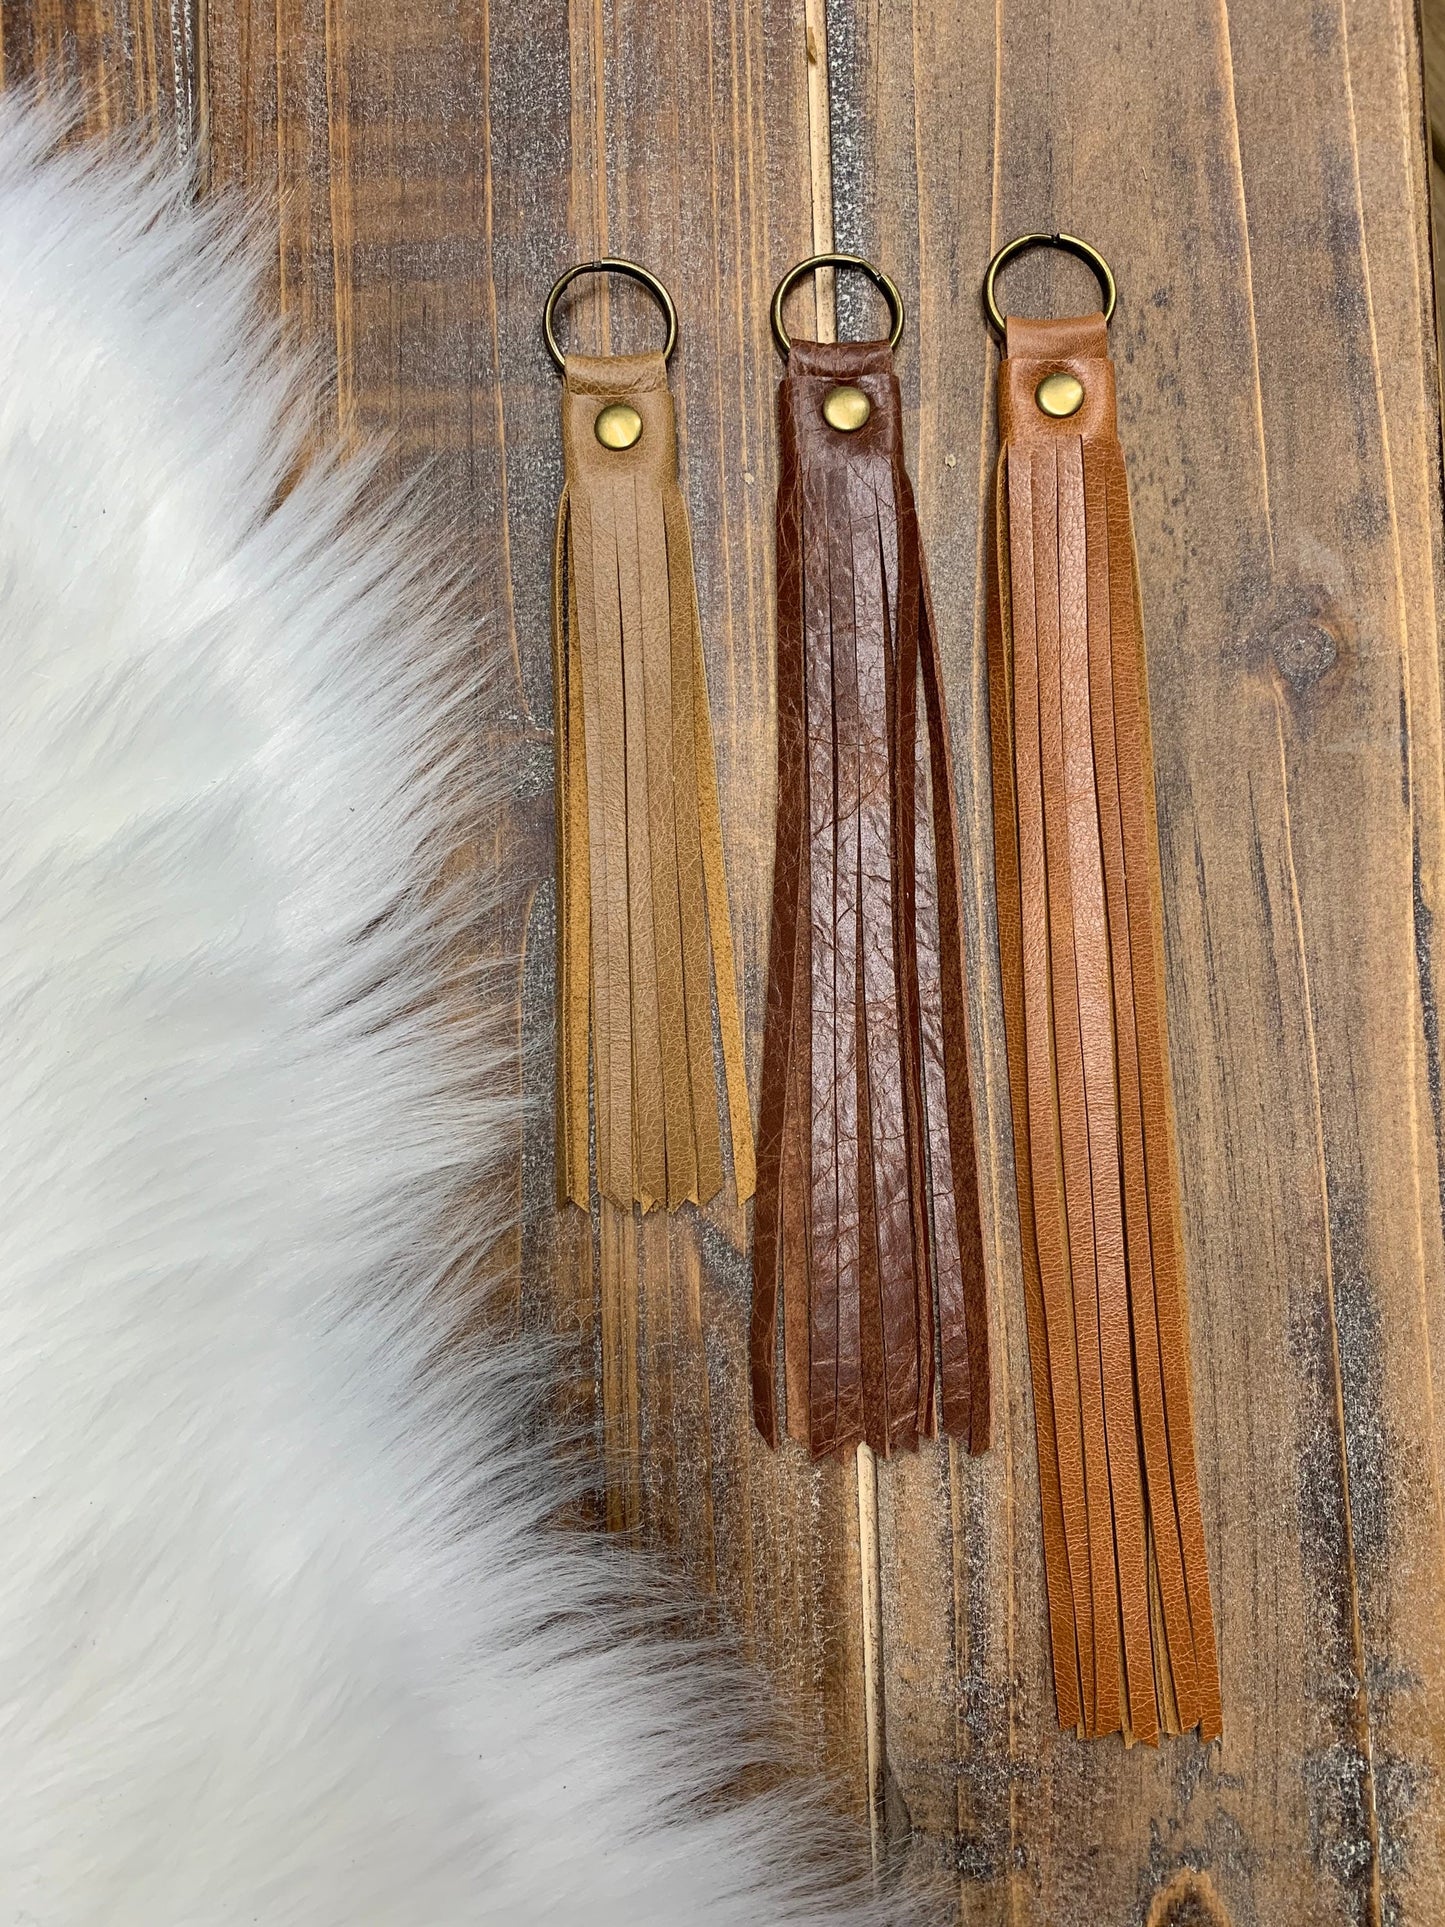 Distressed Brown Leather Tassel, Single Leather Purse Charm, Leather Key  Ring, Leather Zipper Pull, Tassels for Handbags, Leather Key Chain 